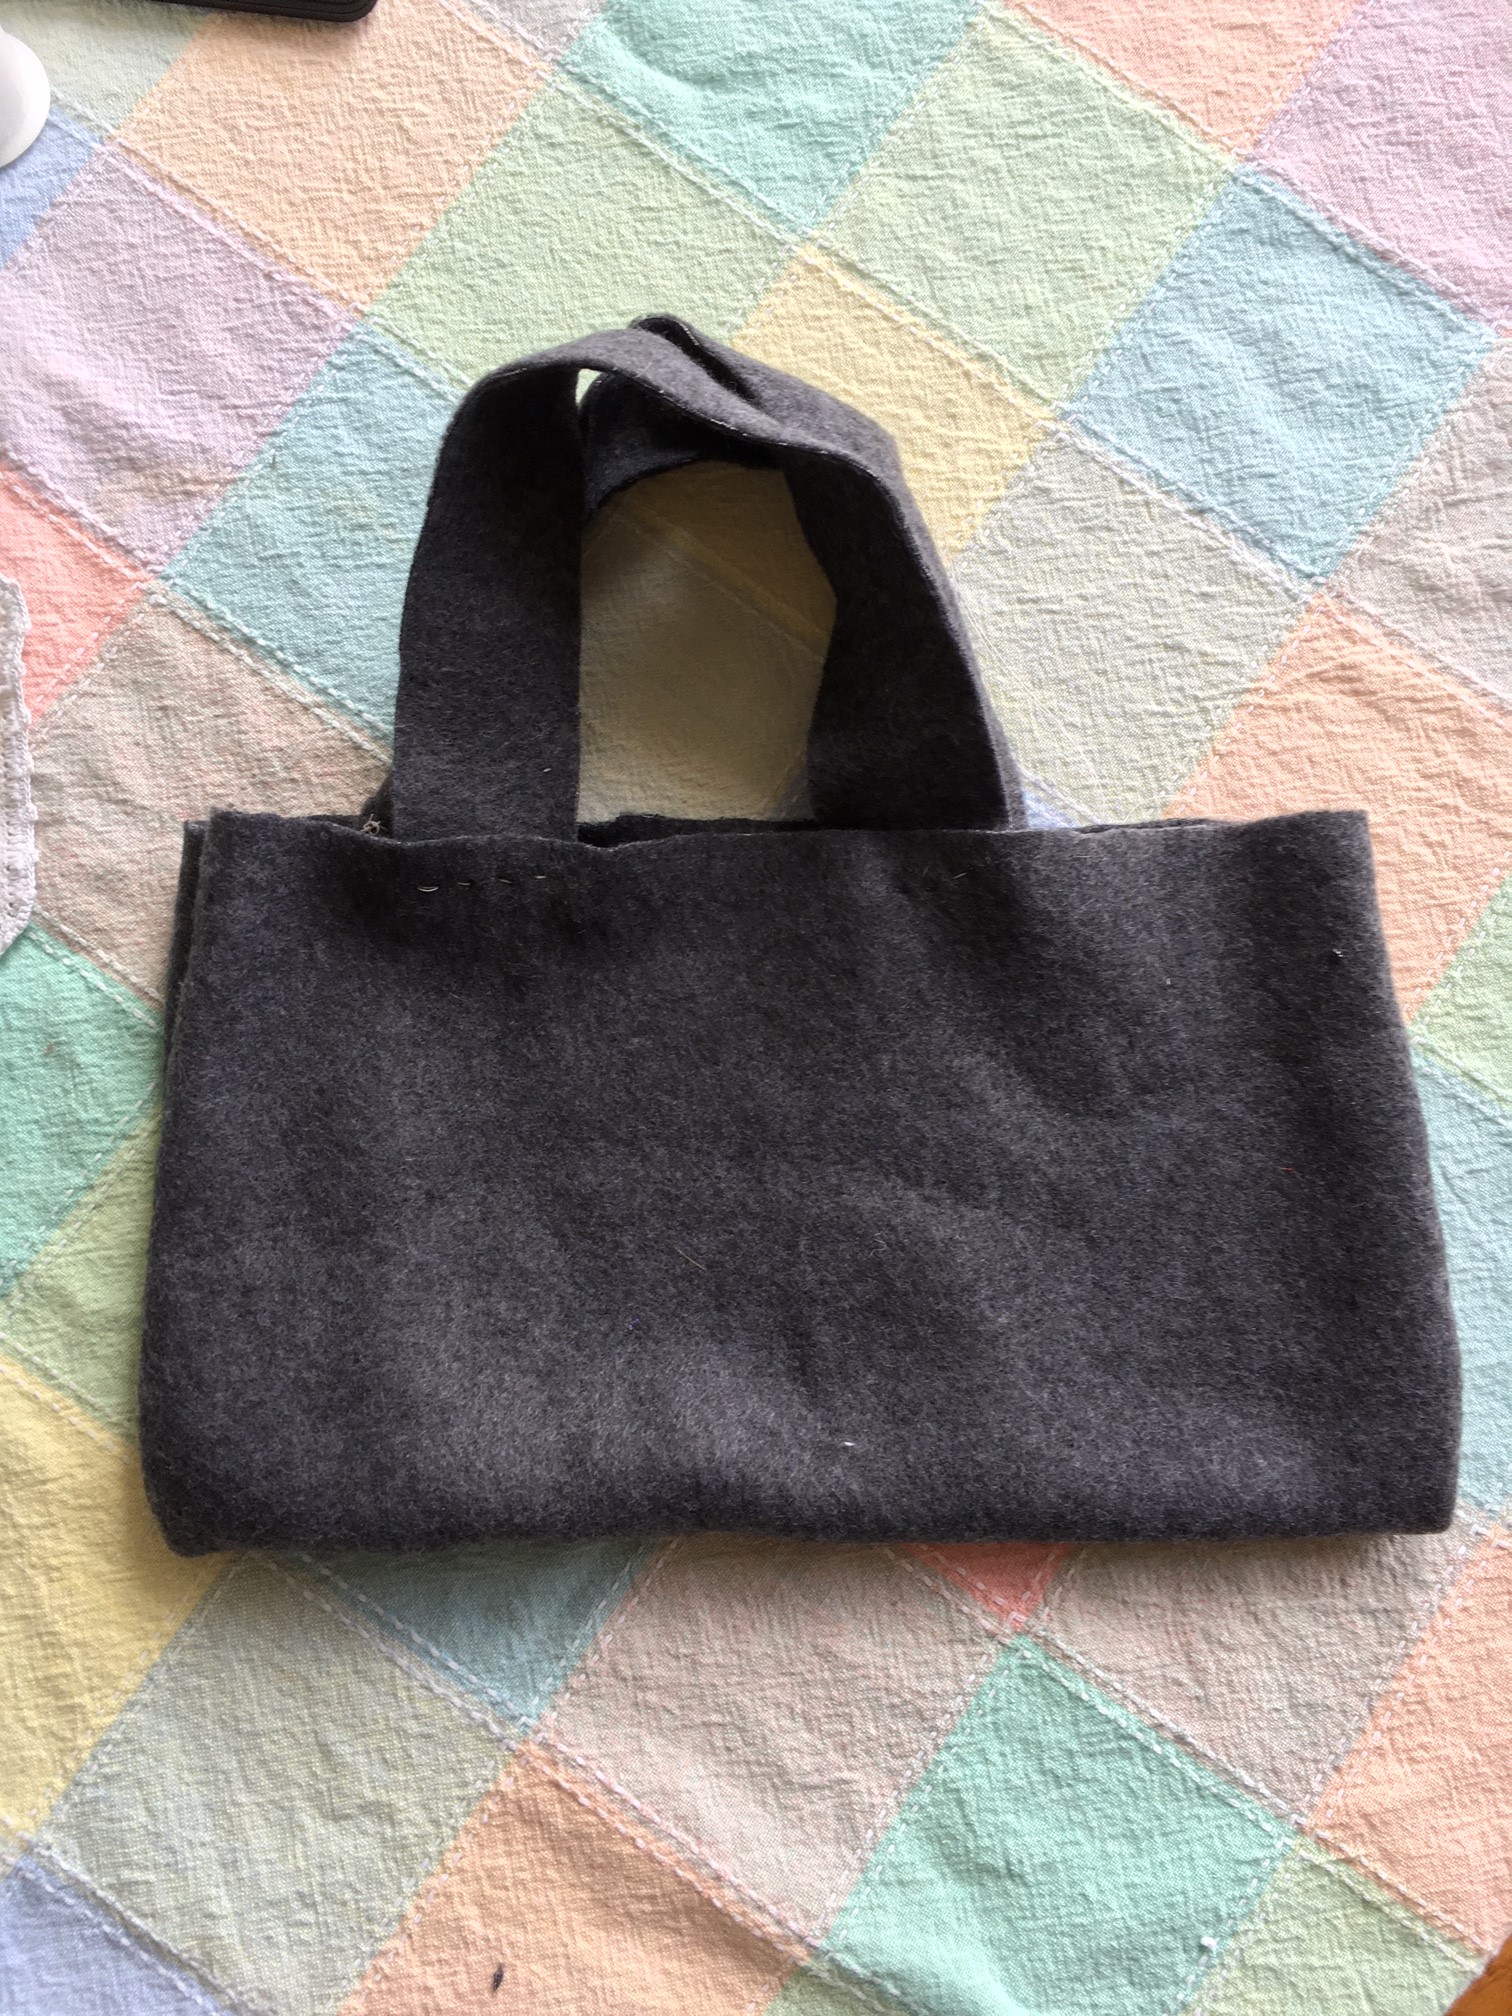 An image of a homemade tote bag